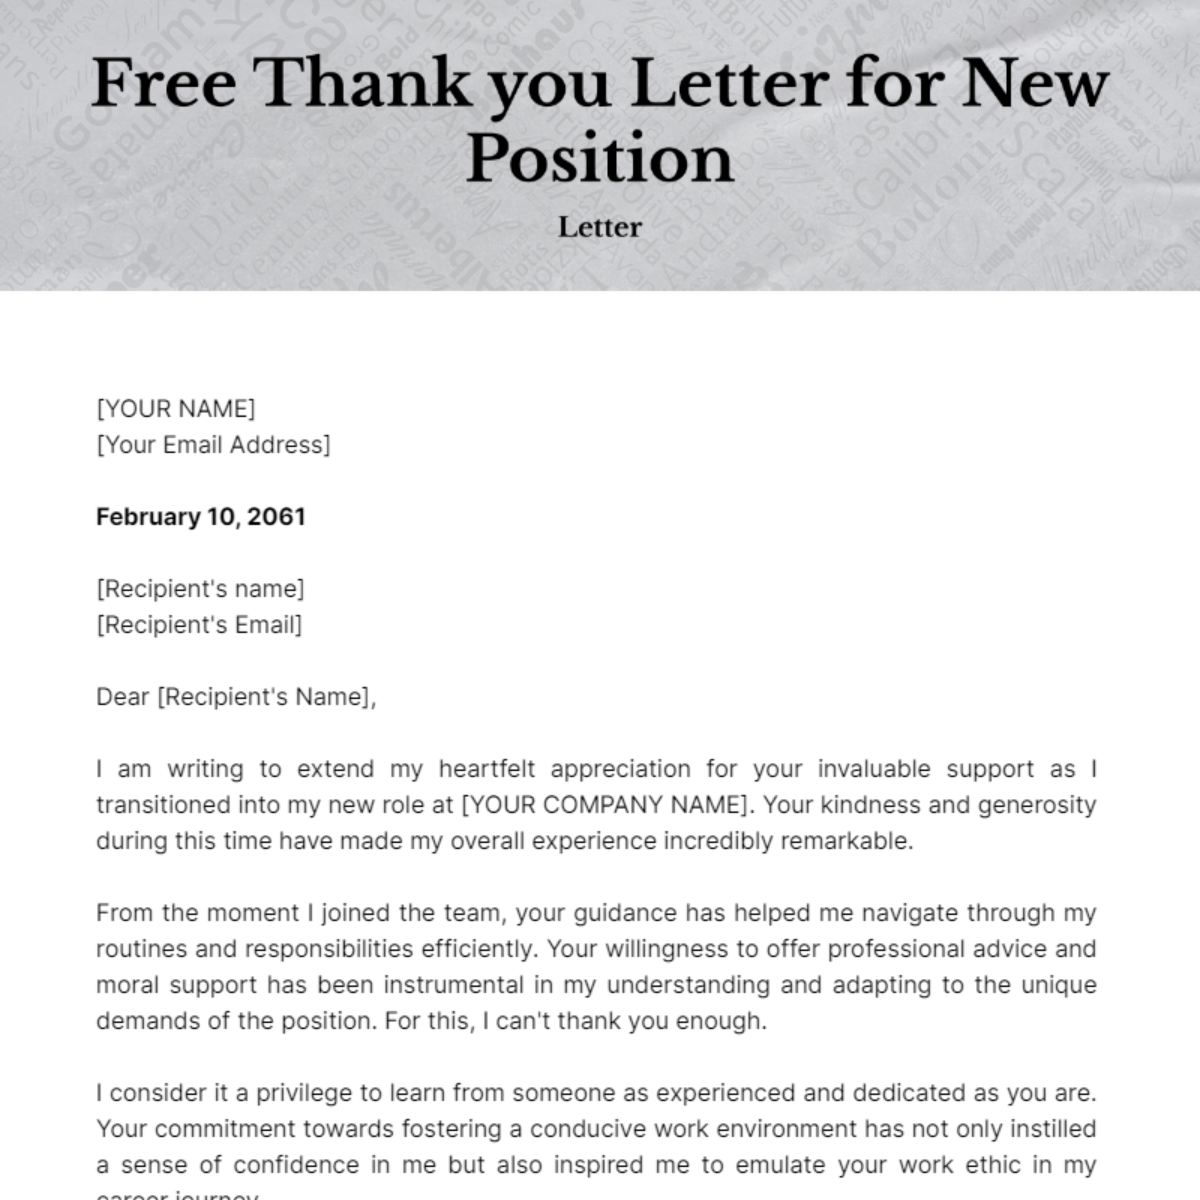 Thank you Letter for New Position Template